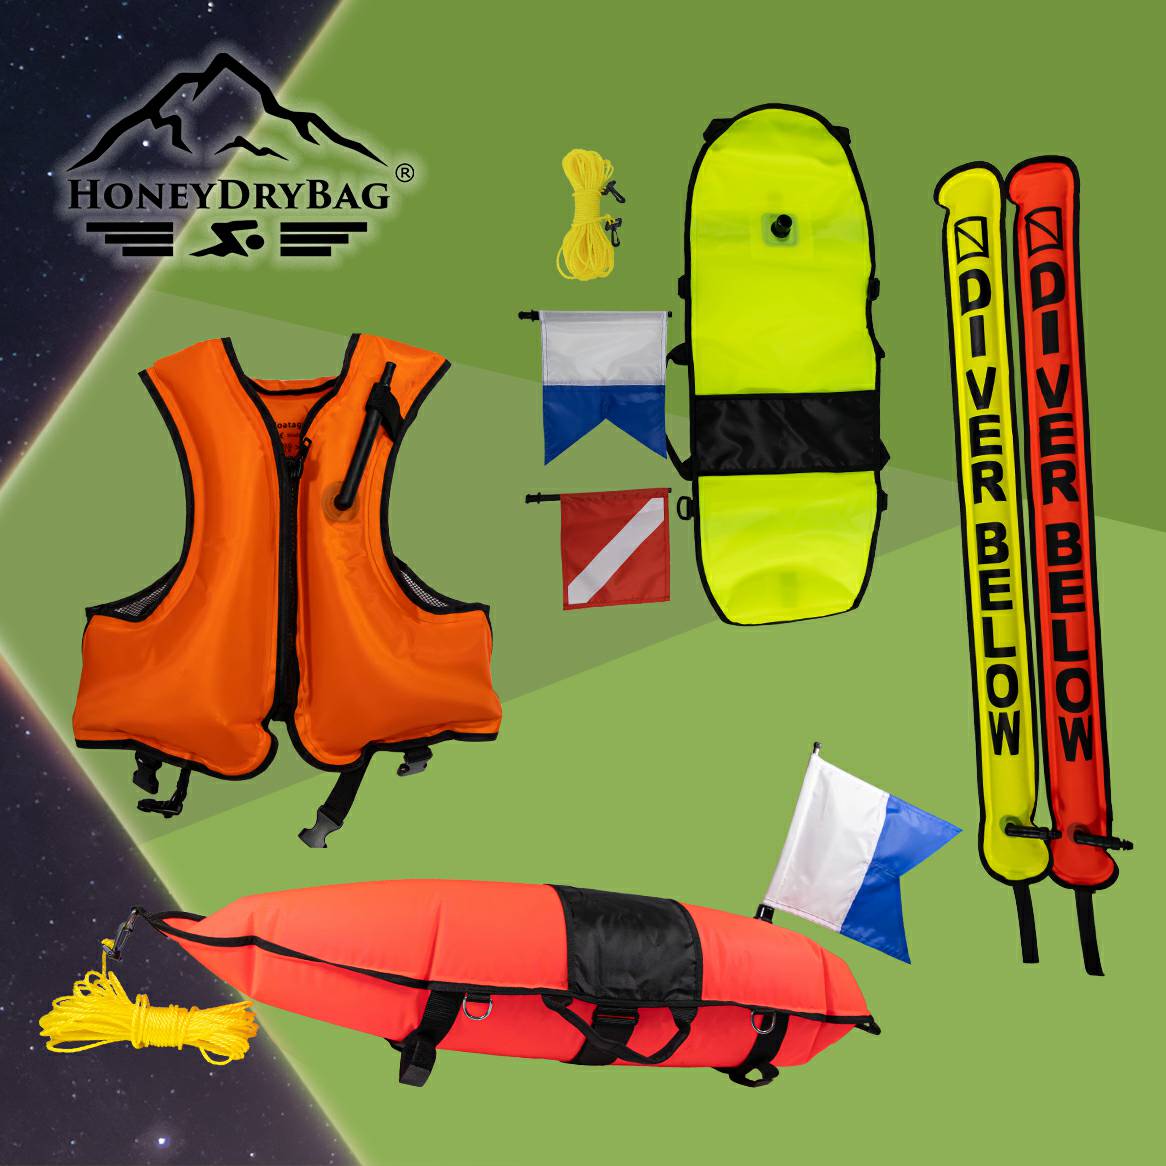 HoneyDryBag diving products